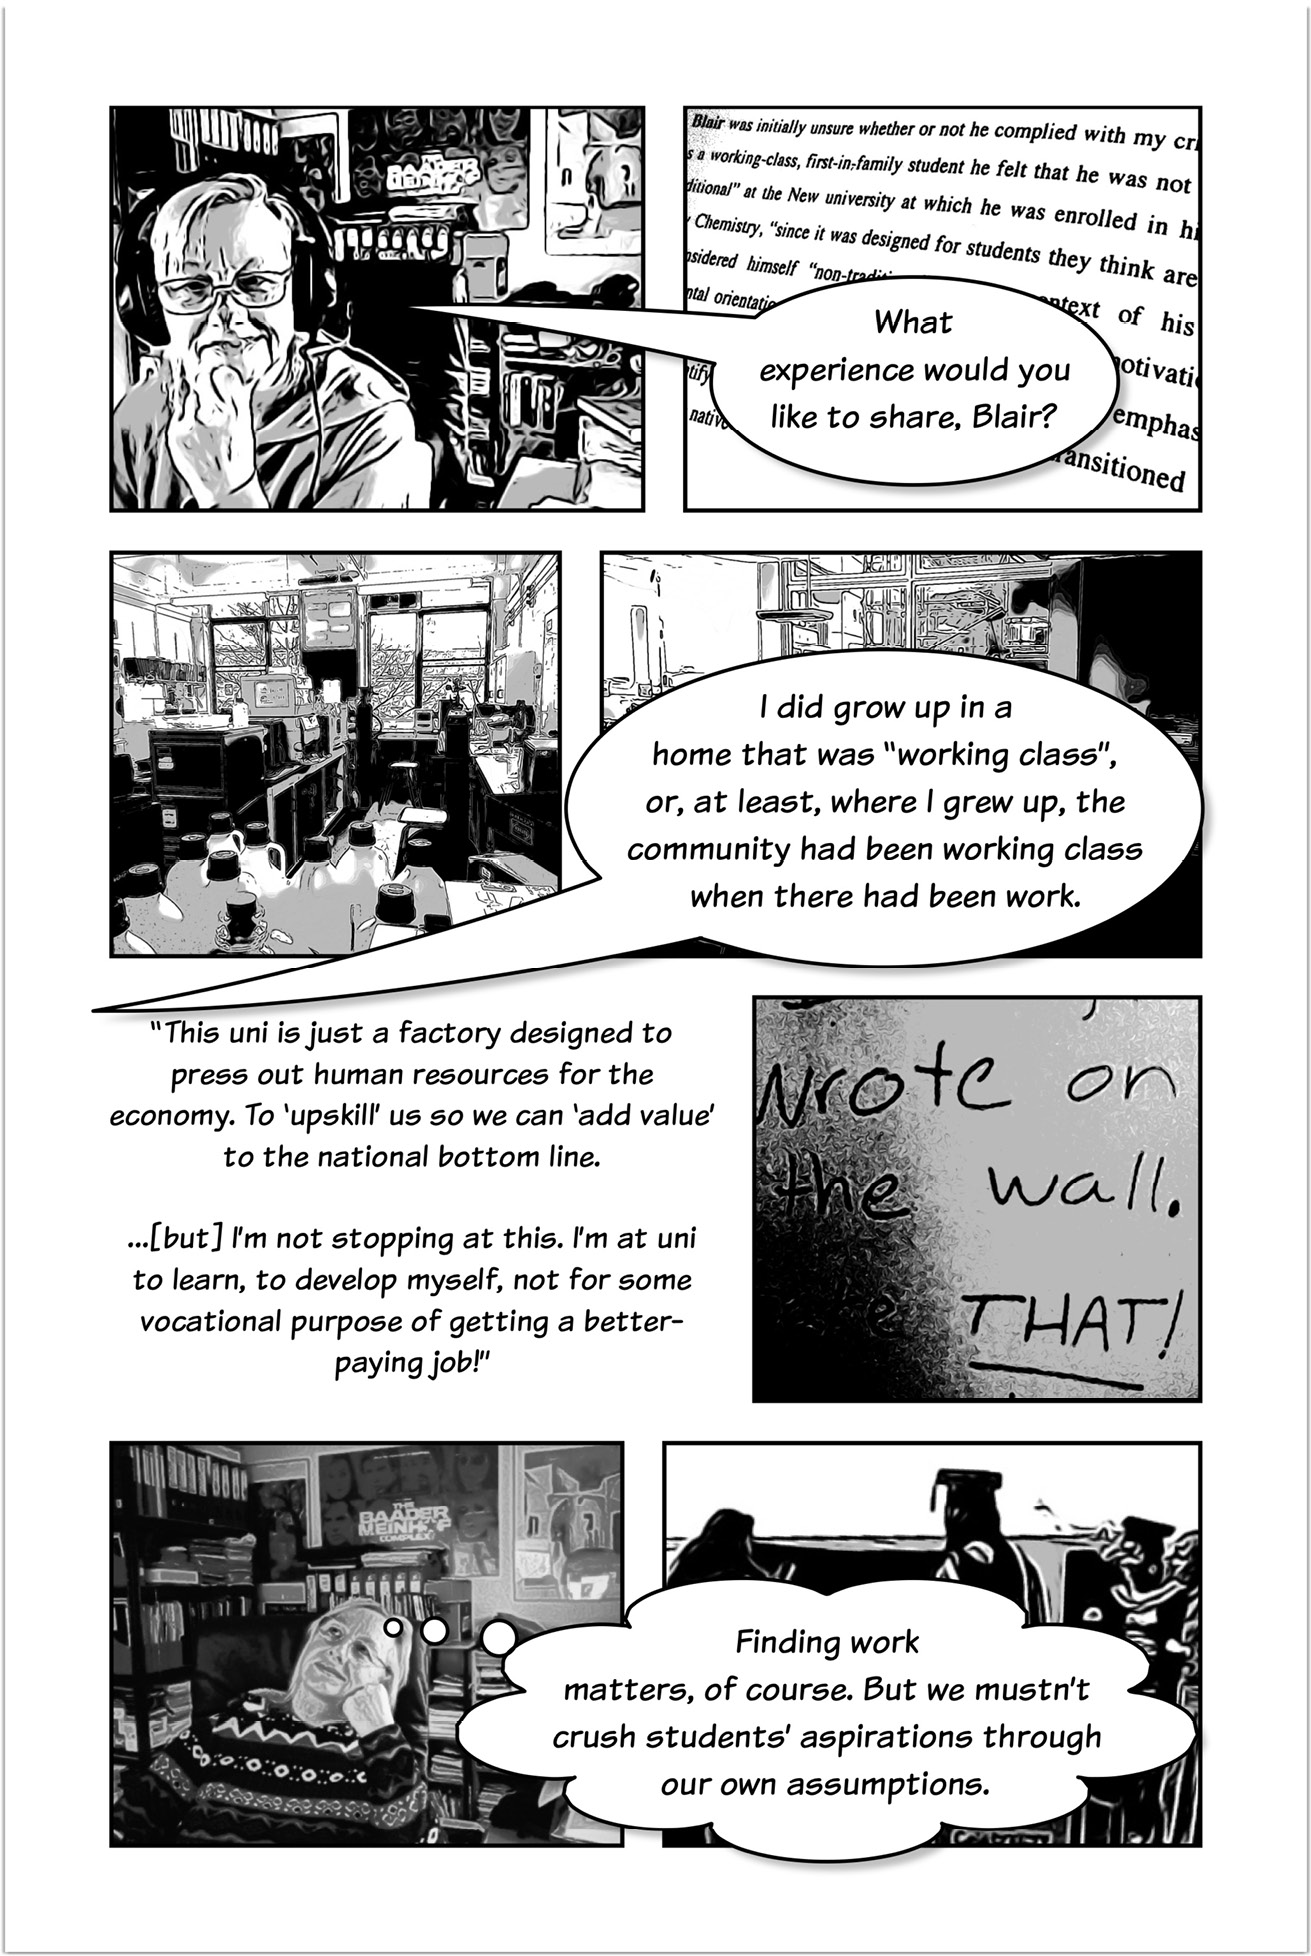 Four-panelled sequence with Trowlerís character having a speech bubble asking ìWhat experience would you like to share, Blair?î followed by a bubble speech with the answer that reads: I did grow up in a home that was ìworking classî, or, at least, where I grew up, the community had been working class when there had been work. Another three-panelled sequence introduced by text that reads: This uni is just a factory designed to press out human resources for the economy. To ìupskillî us so we can ìadd valueî to the national bottom line. But Iím not stopping at this. Iím at uni to learn, to develop myself, not for some vocational purpose of getting a better-paying job! Then a panel showing a text written on a wall that reads: wrote on the wall. That! The next panel presents Trowlerís character with a thought bubble that reads: Finding work matters, of course. But we mustnít crush studentsí aspirations through our own assumptions.